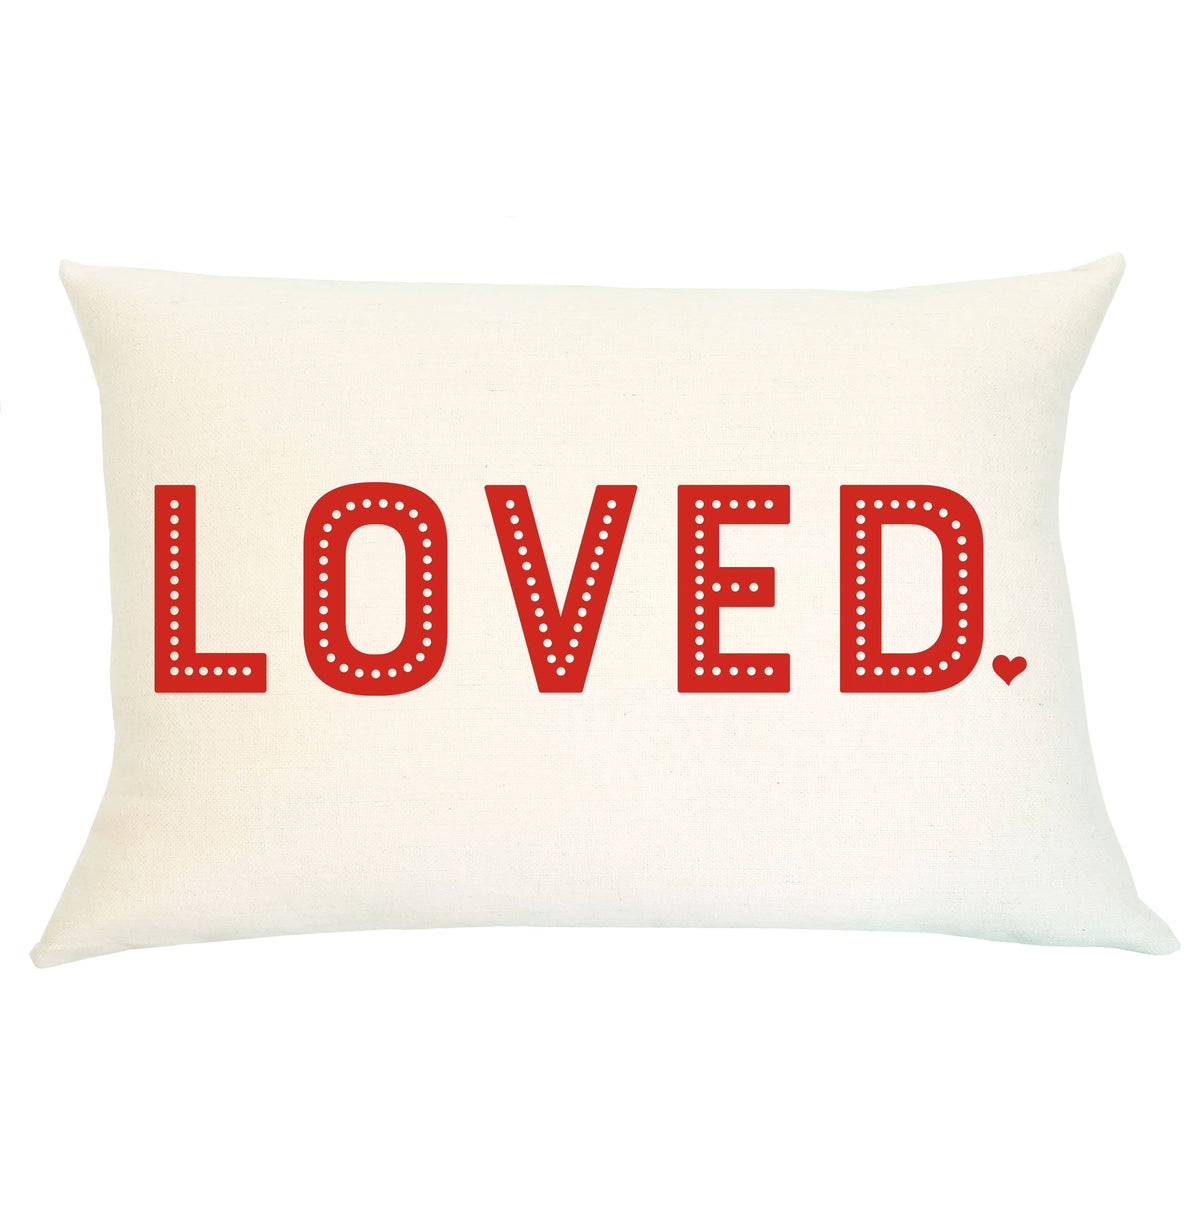 Pillow Lumbar Double Sided - Loved and Lucky - Insert Included